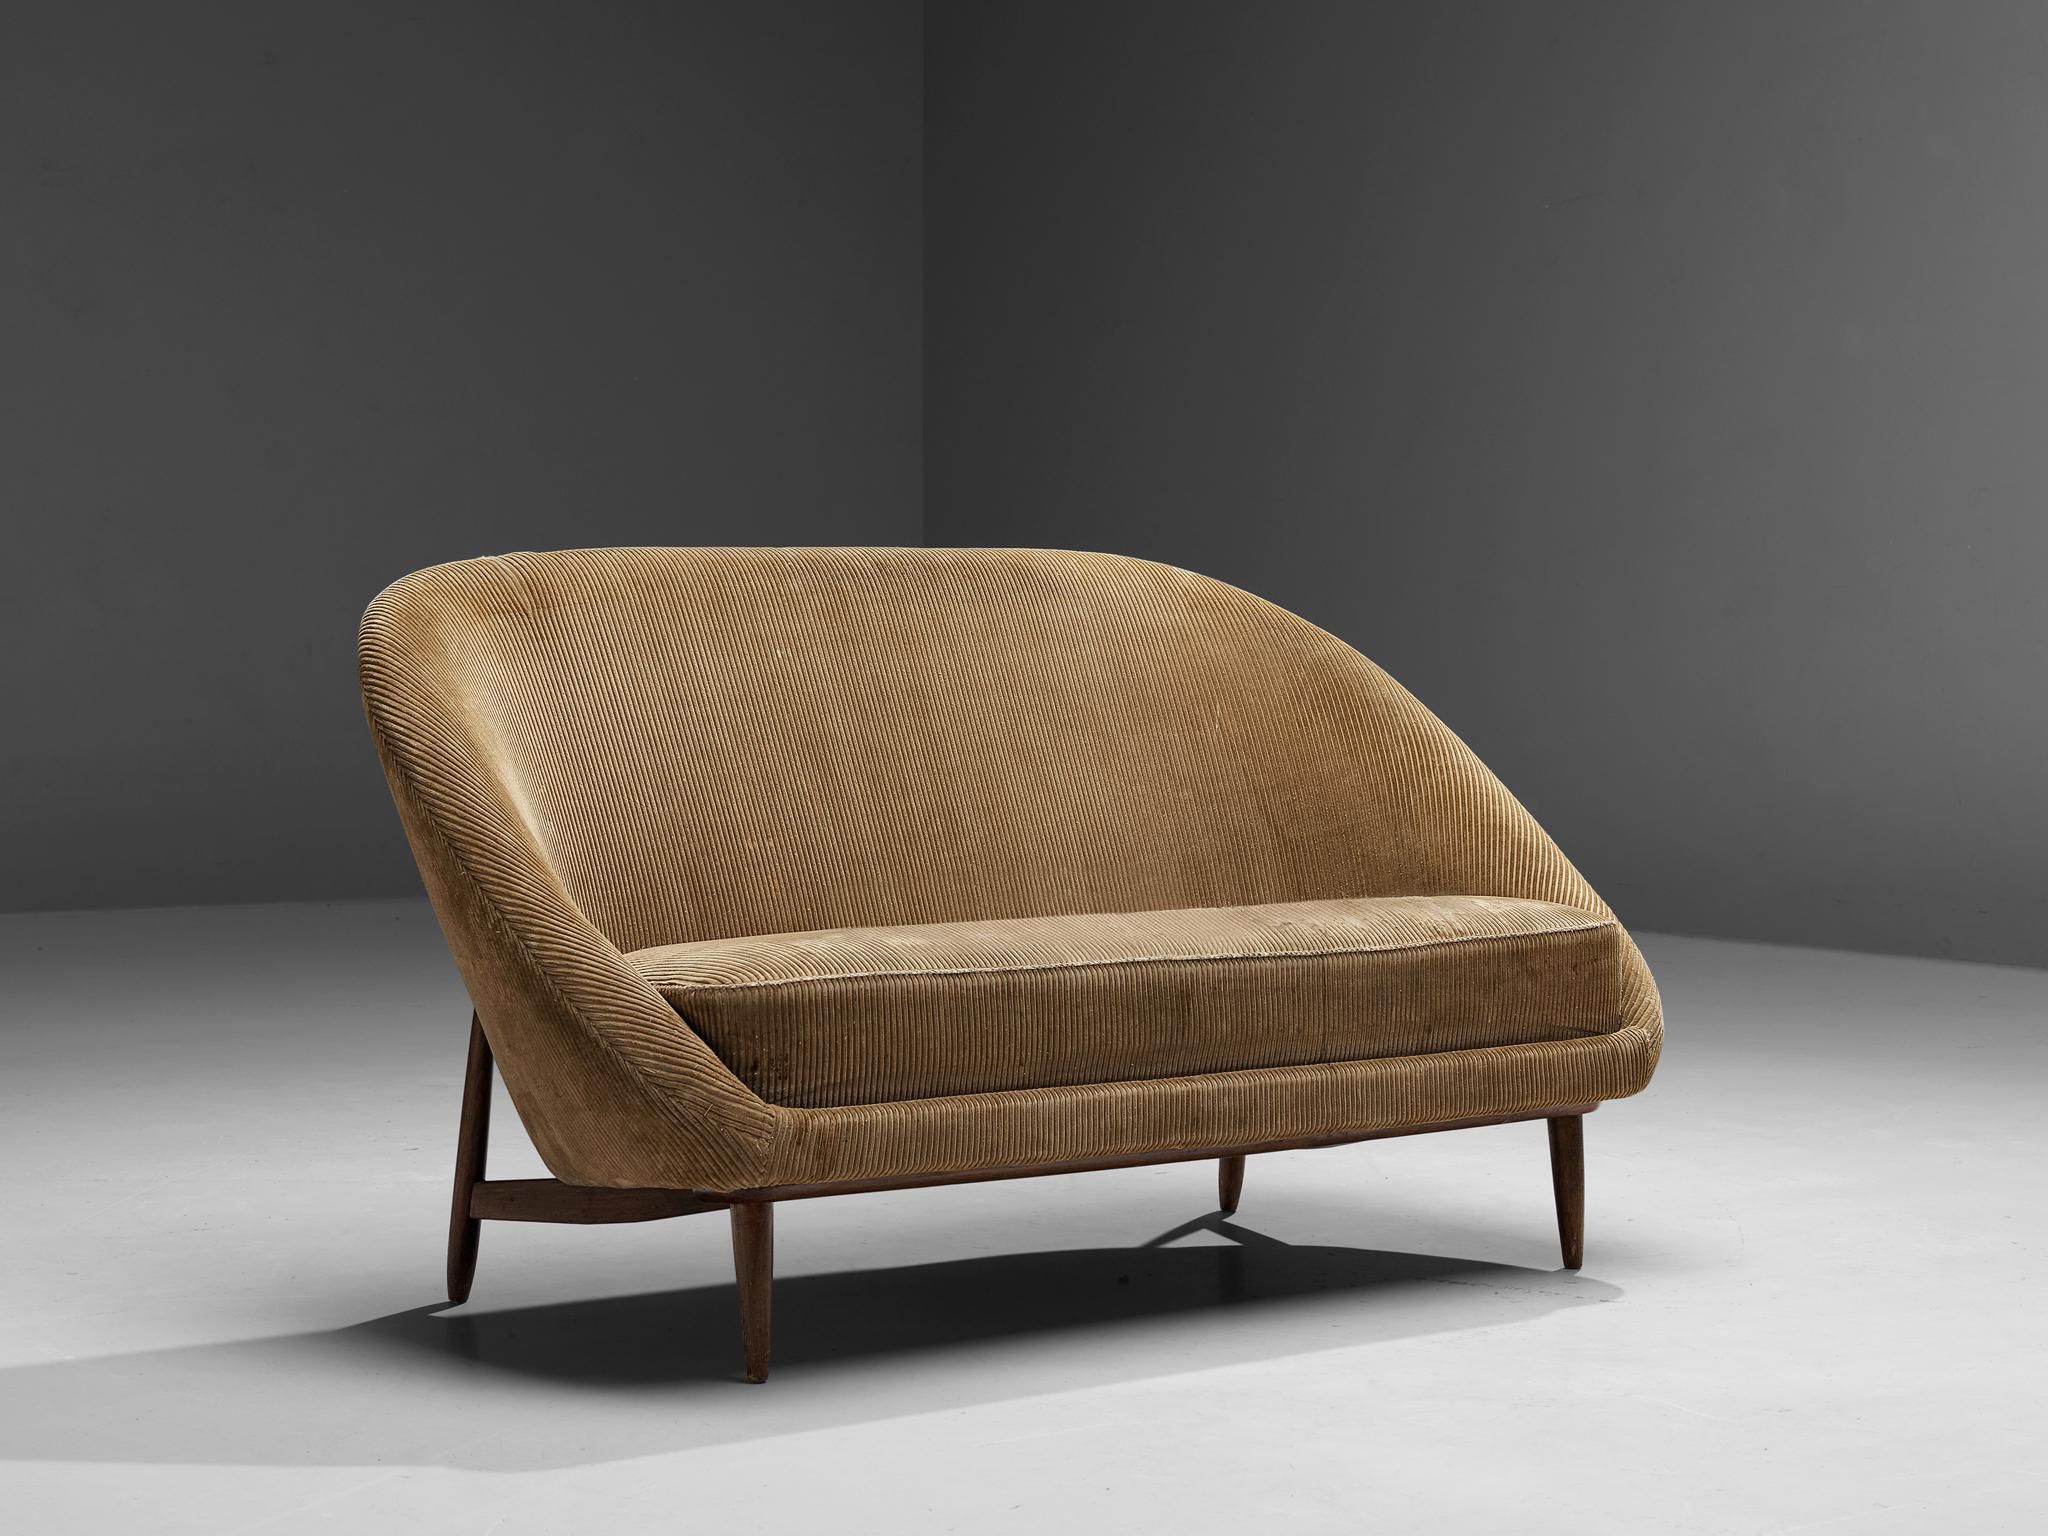 Theo Ruth for Artifort, sofa, fabric, wood, The Netherlands, 1970. 

A Dutch settee in beige corduroy upholstery by Theo Ruth. The back tilts slightly backward and has the recognizable natural flow and feel of Ruth's design. The frame of the sofa is